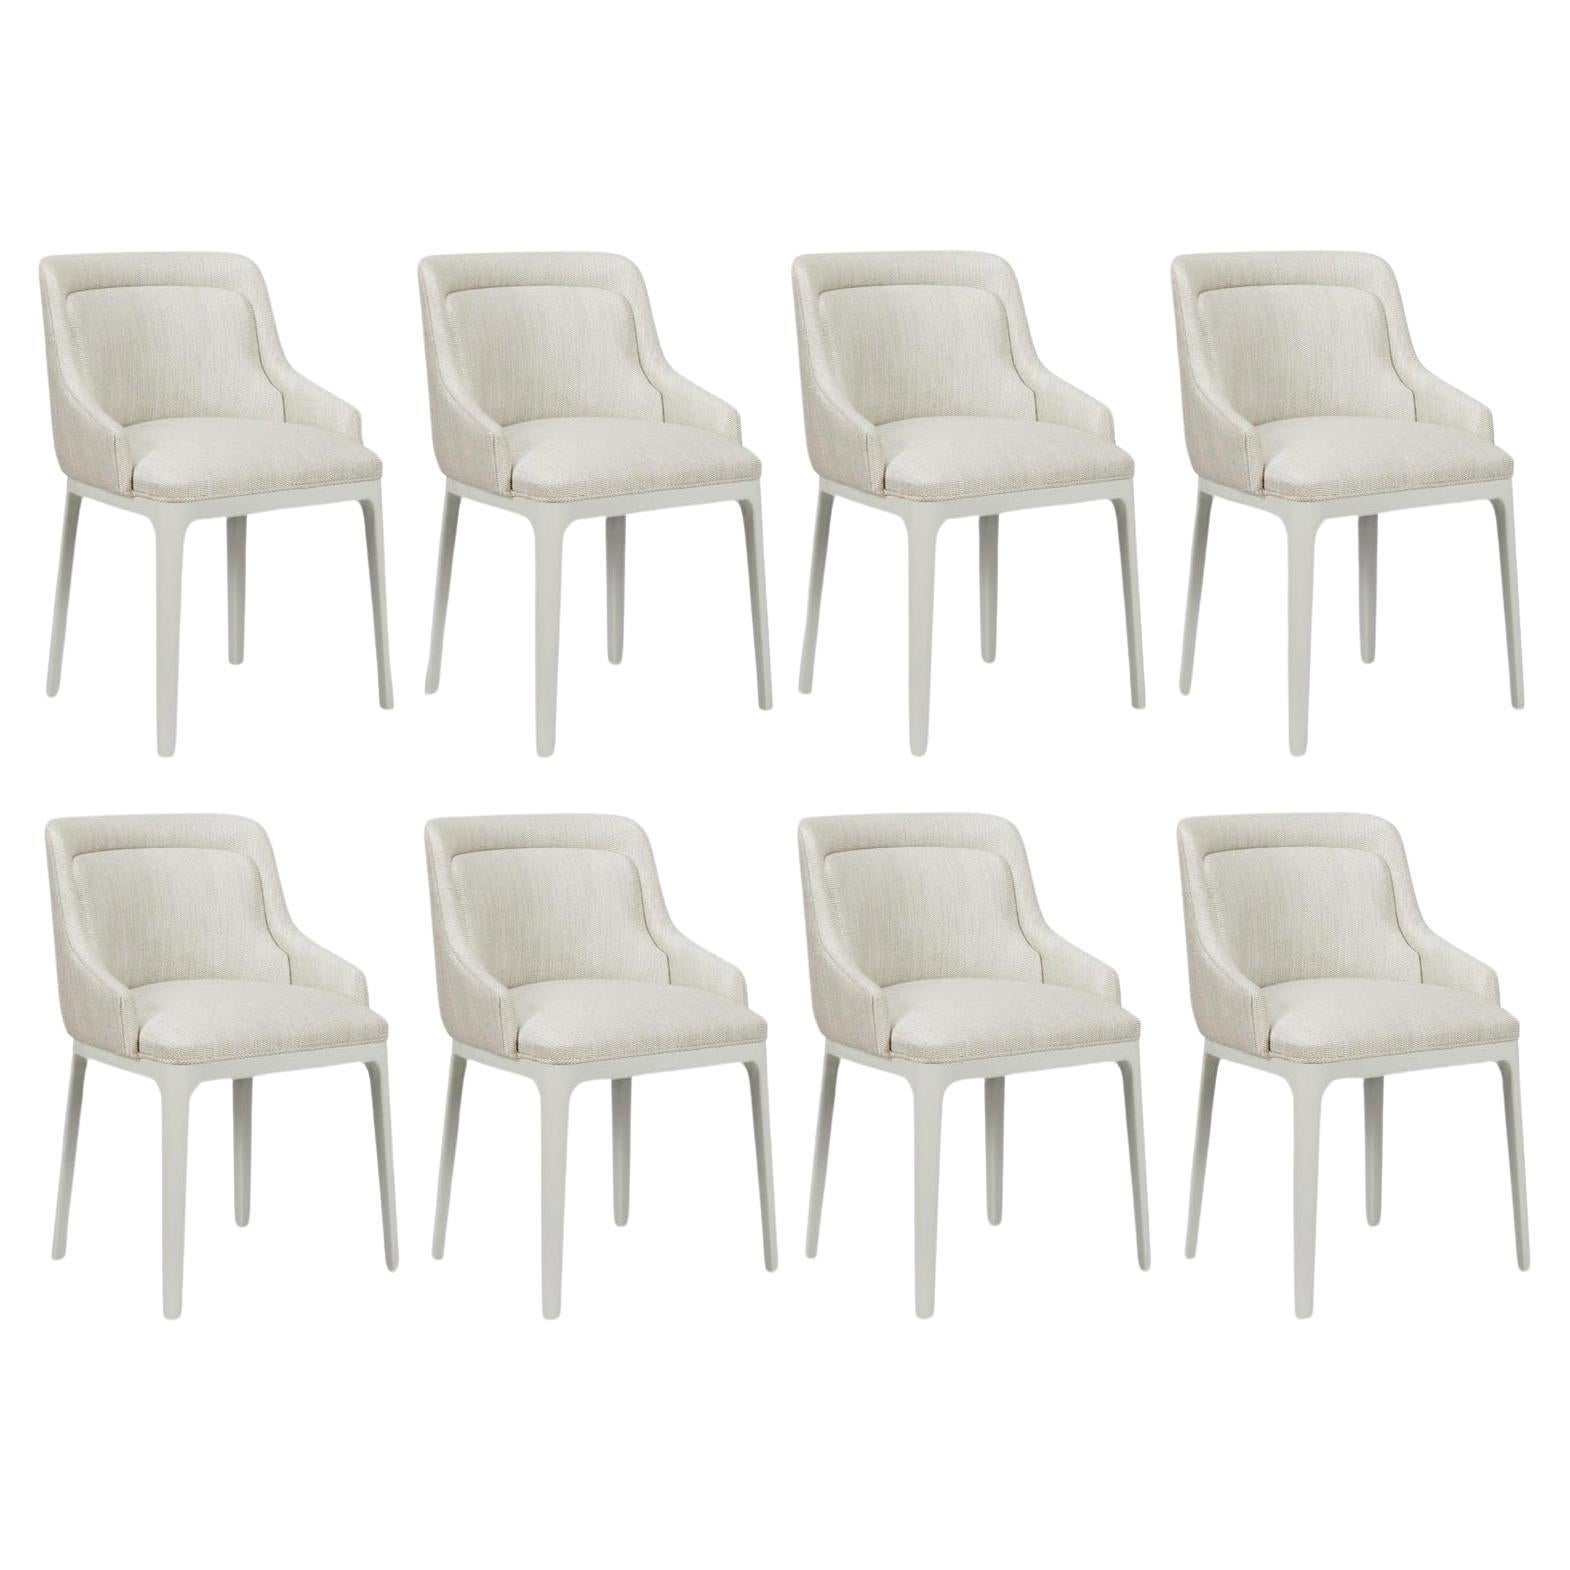 Minimalist-Style Dining Chair with Customizable Lacquer Colors, Set of 8 For Sale